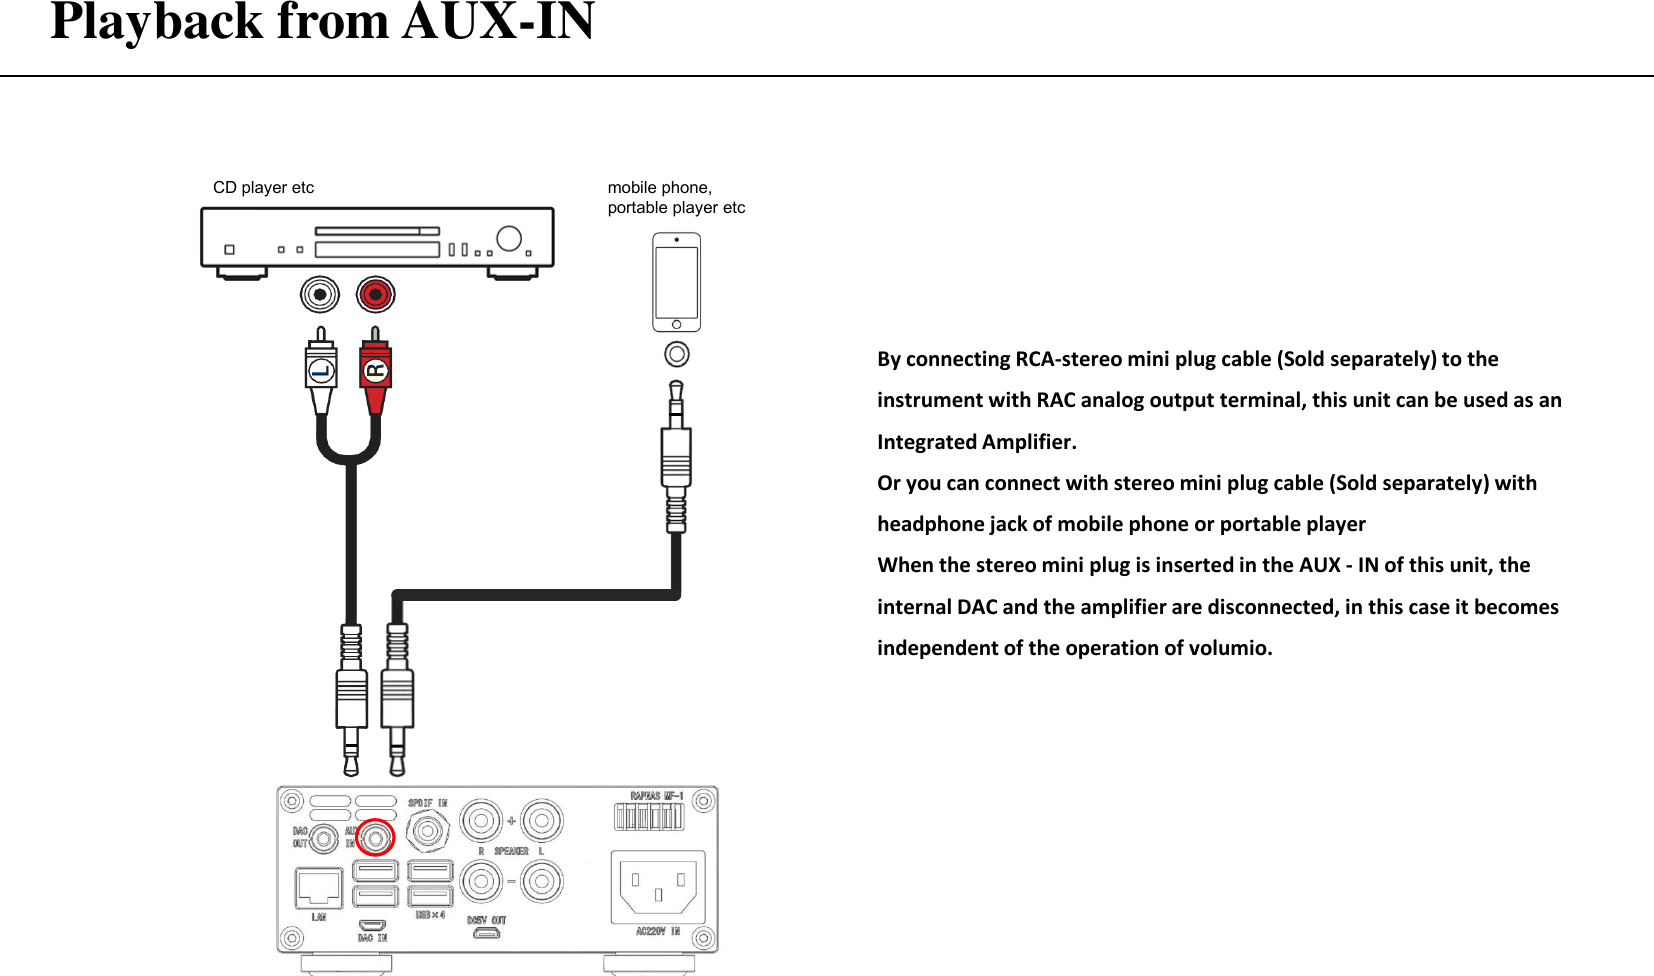 Playback from AUX-IN By connecting RCA-stereo mini plug cable (Sold separately) to the instrument with RAC analog output terminal, this unit can be used as an Integrated Amplifier. Or you can connect with stereo mini plug cable (Sold separately) with headphone jack of mobile phone or portable player When the stereo mini plug is inserted in the AUX - IN of this unit, the internal DAC and the amplifier are disconnected, in this case it becomes independent of the operation of volumio. CD player etc  mobile phone,  portable player etc 